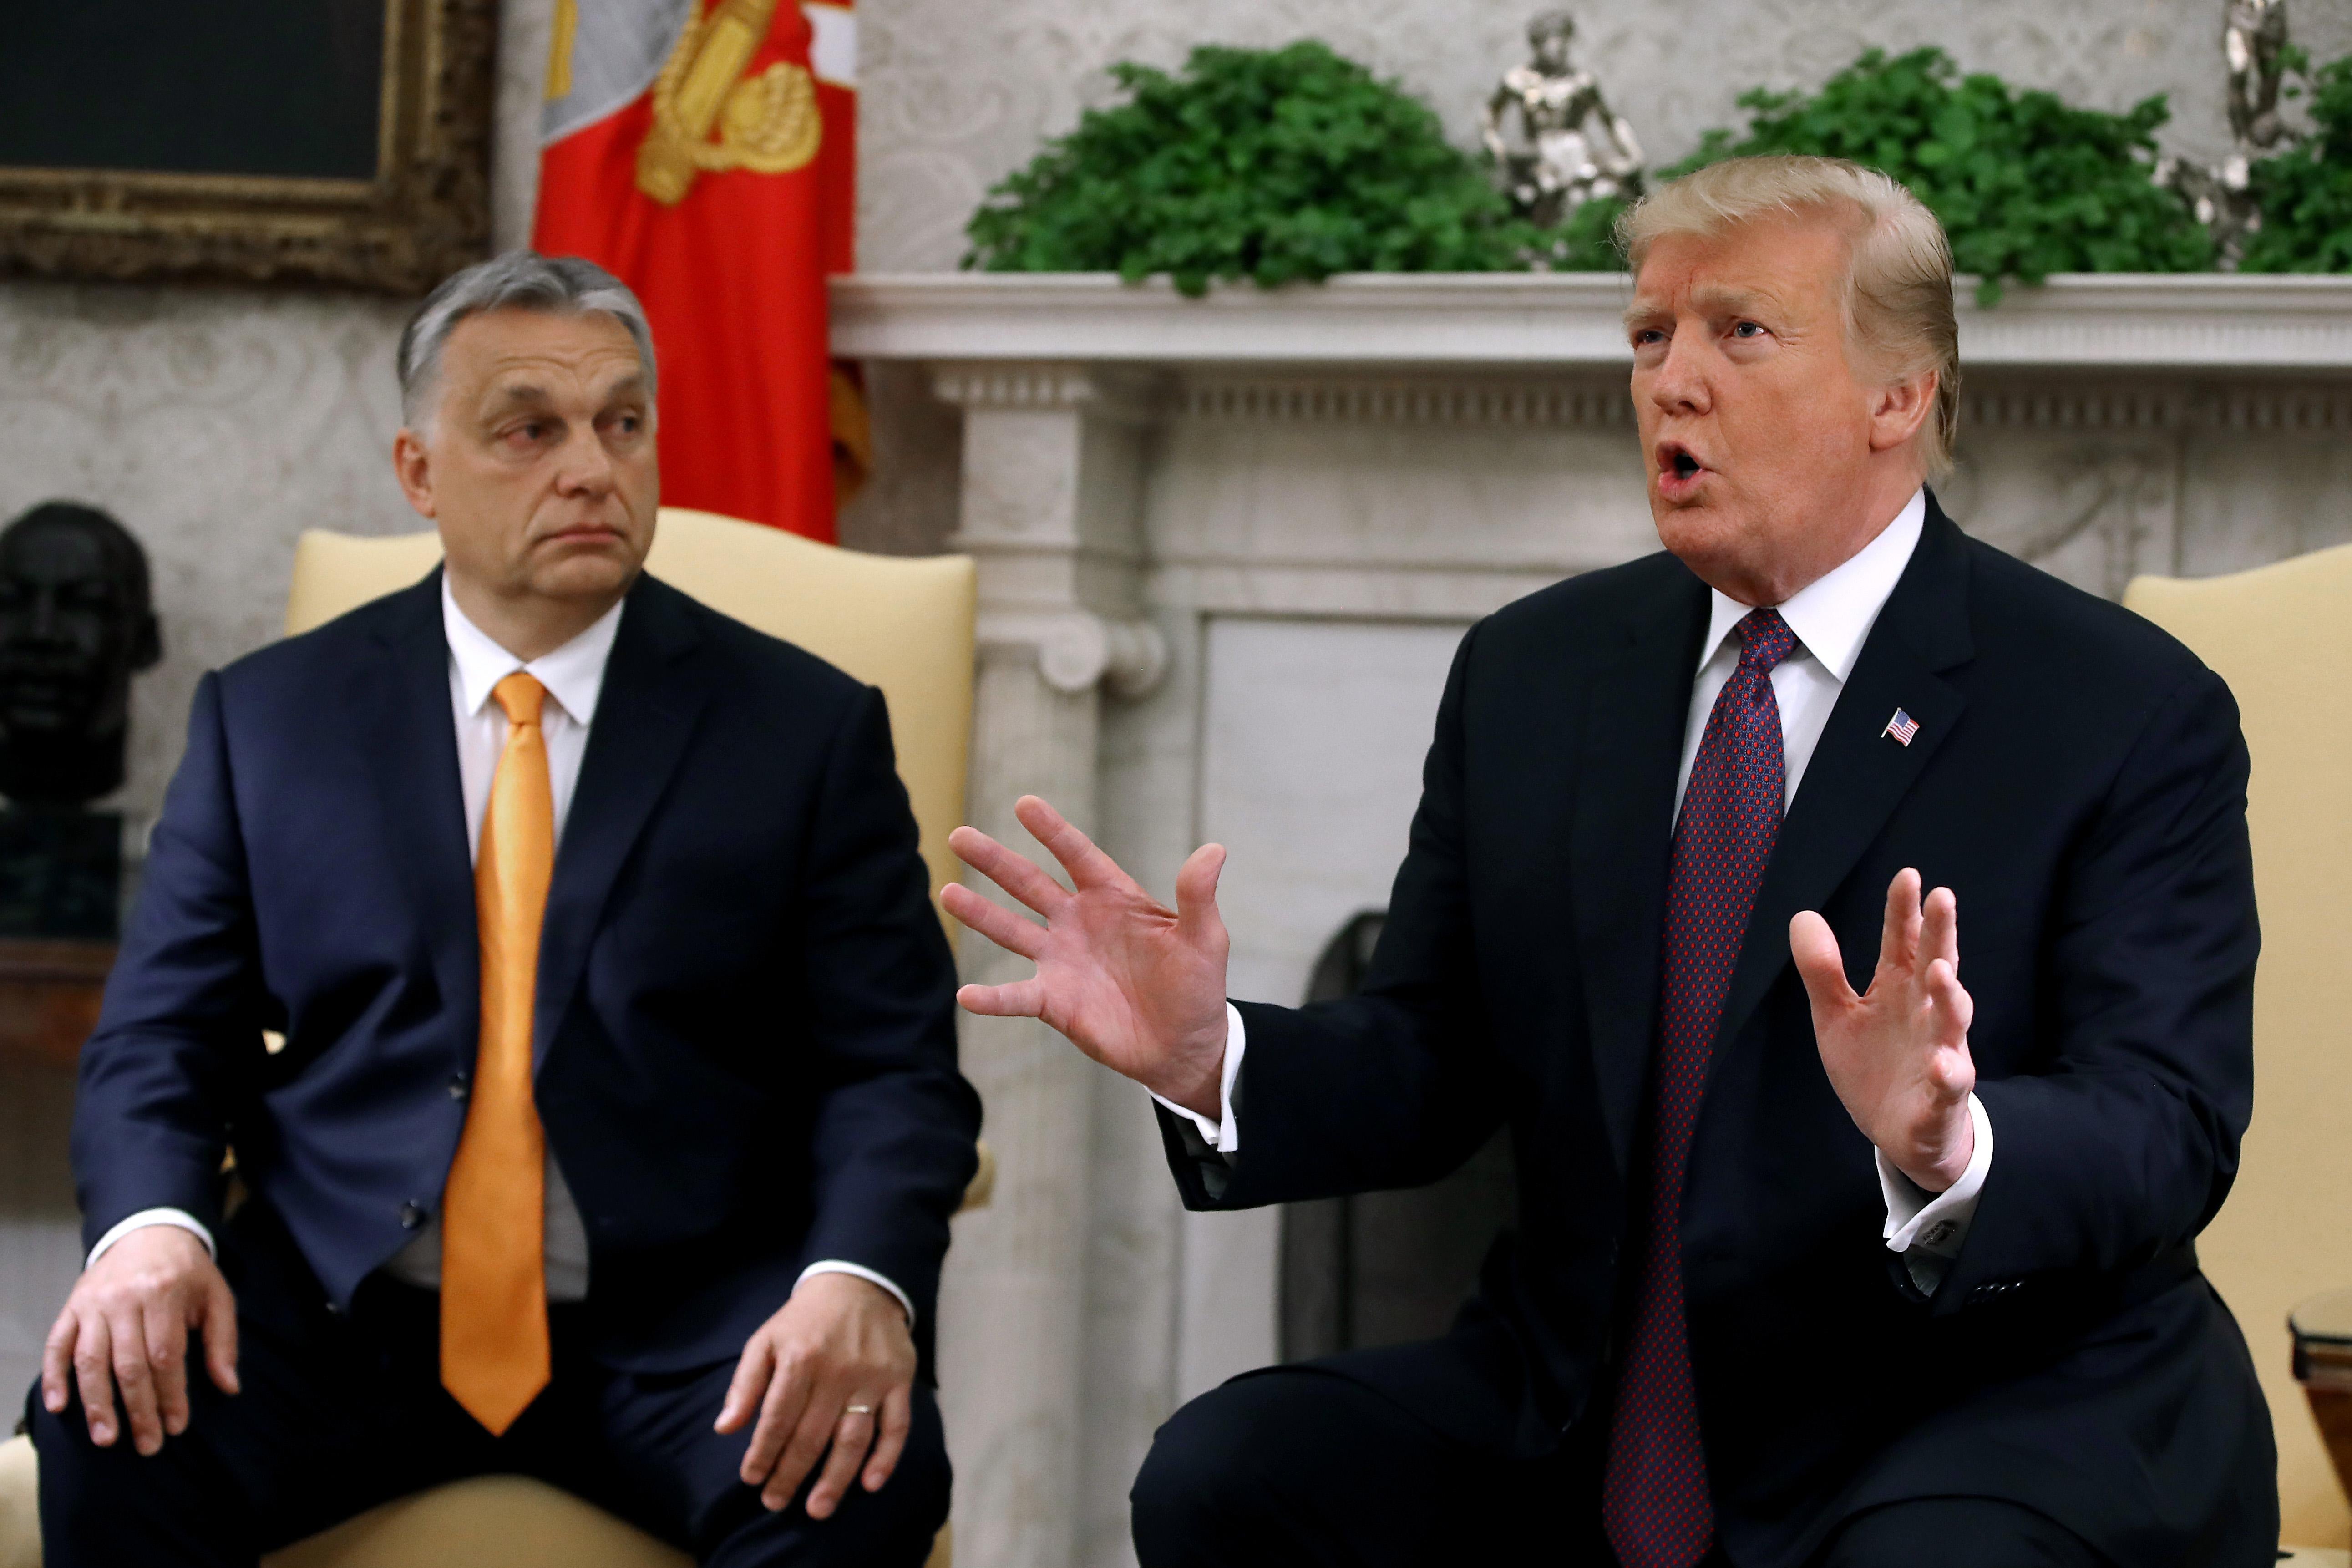 Orban seated beside Trump in the Oval Office.